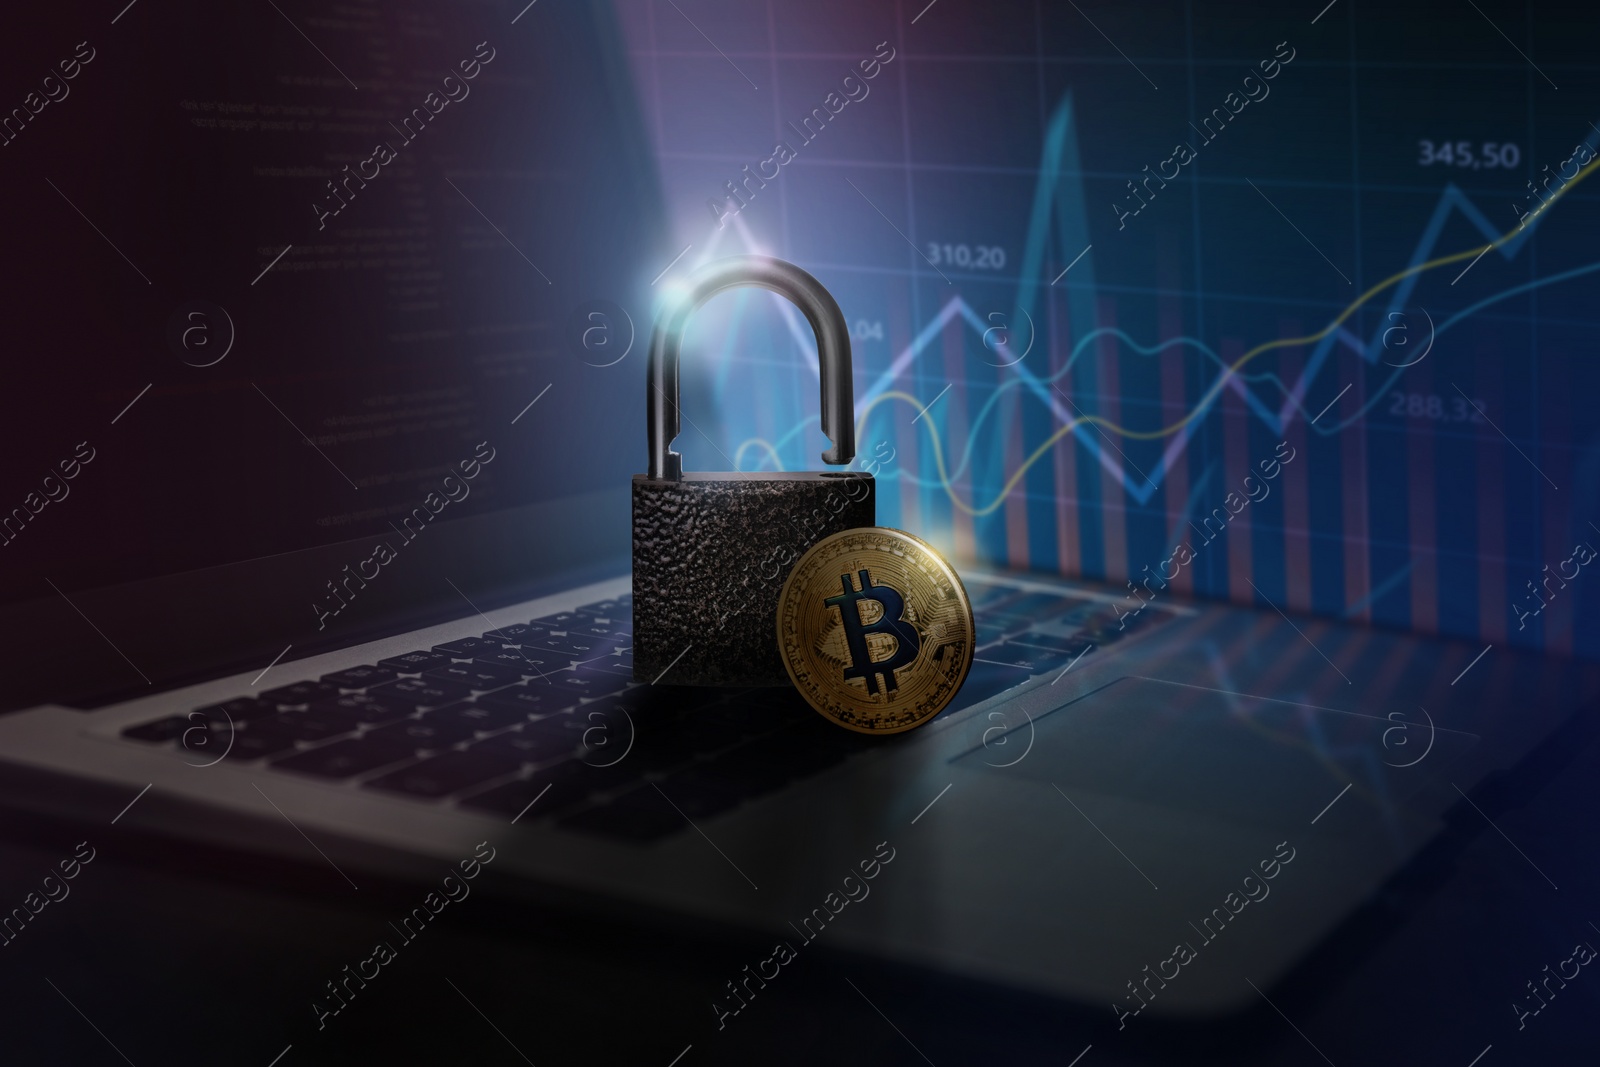 Image of Digital currency security. Bitcoin and padlock on laptop. Charts and graphs